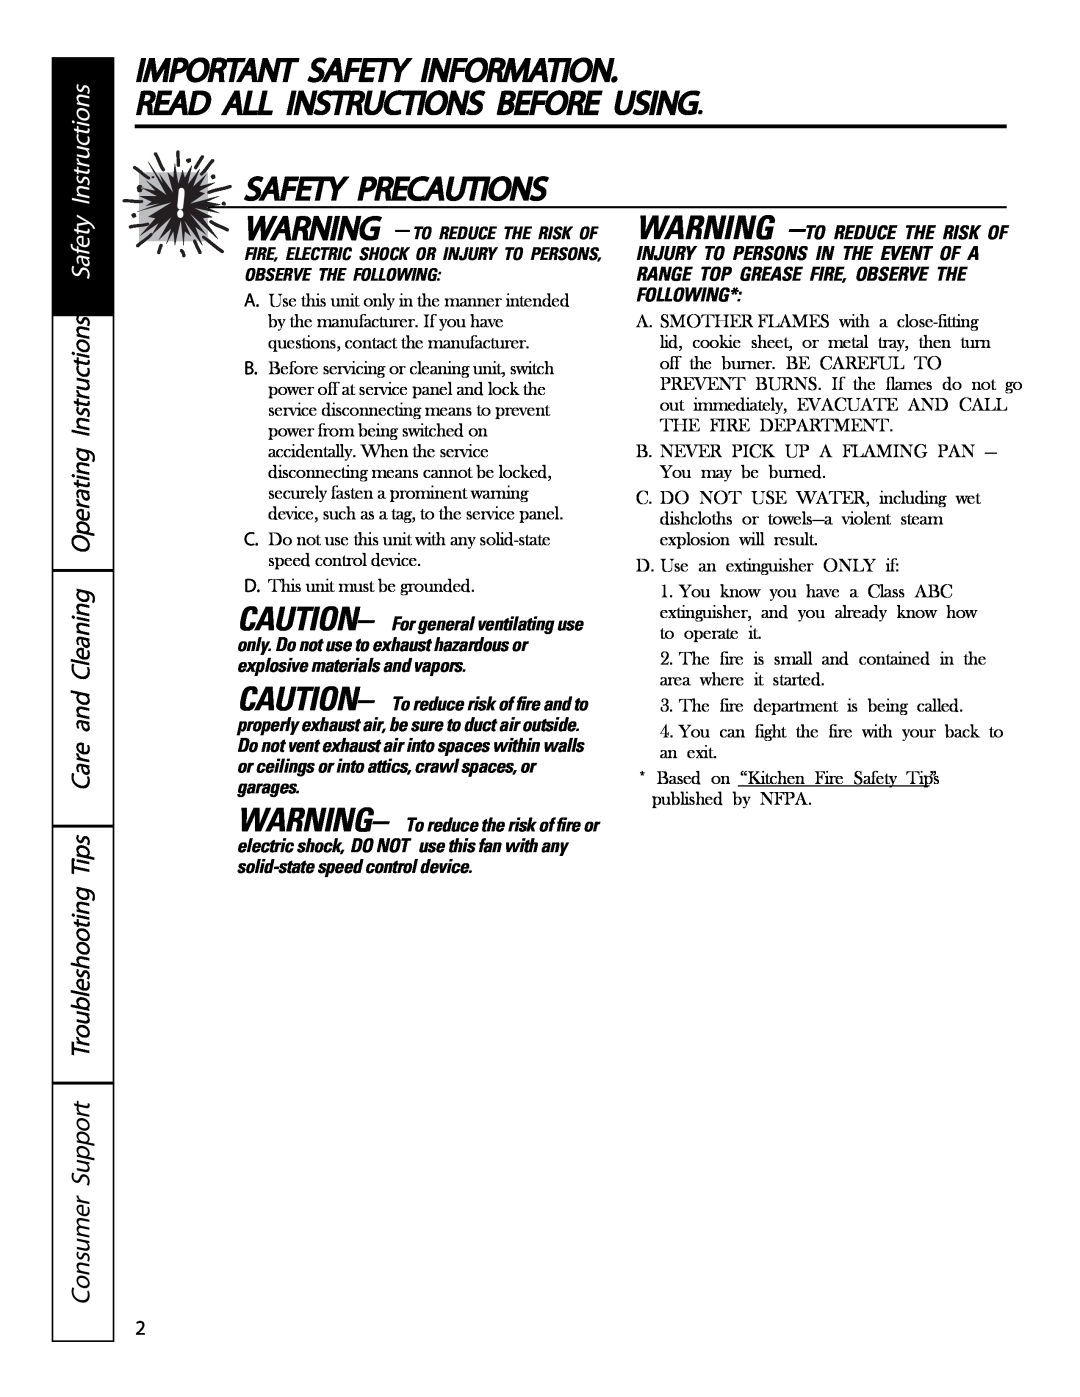 GE PVWG936, PVWT936, PVWS930, PVIG940 Read All Instructions Before Using, Important Safety Information, Safety Precautions 